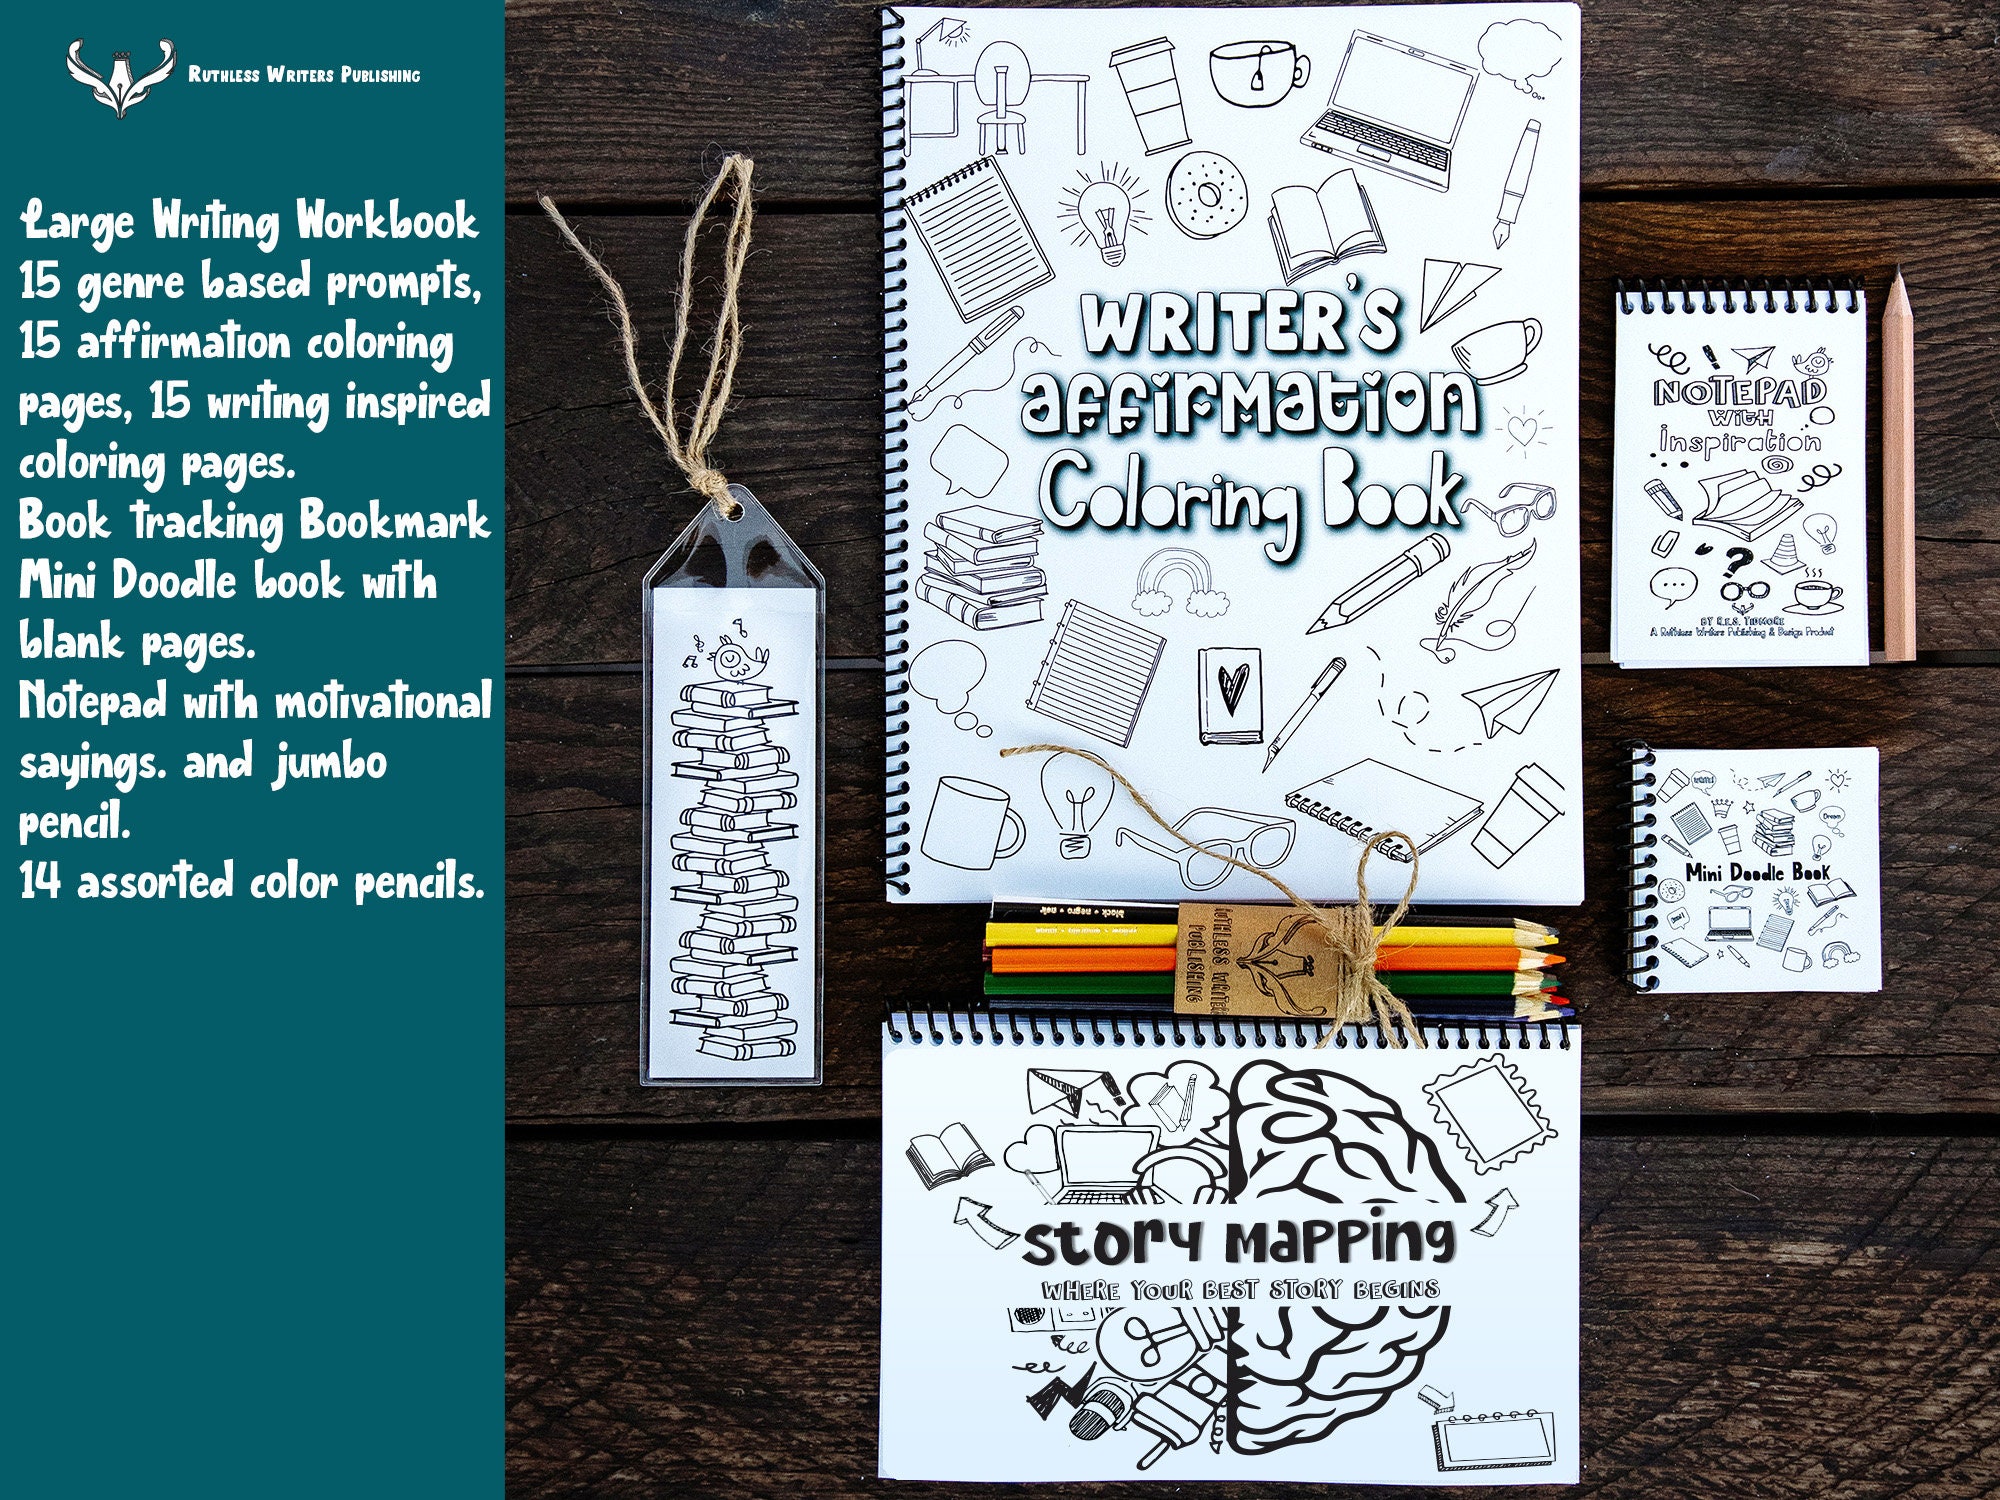 Gift Ideas for Encouraging Young Writers - Artsy Momma